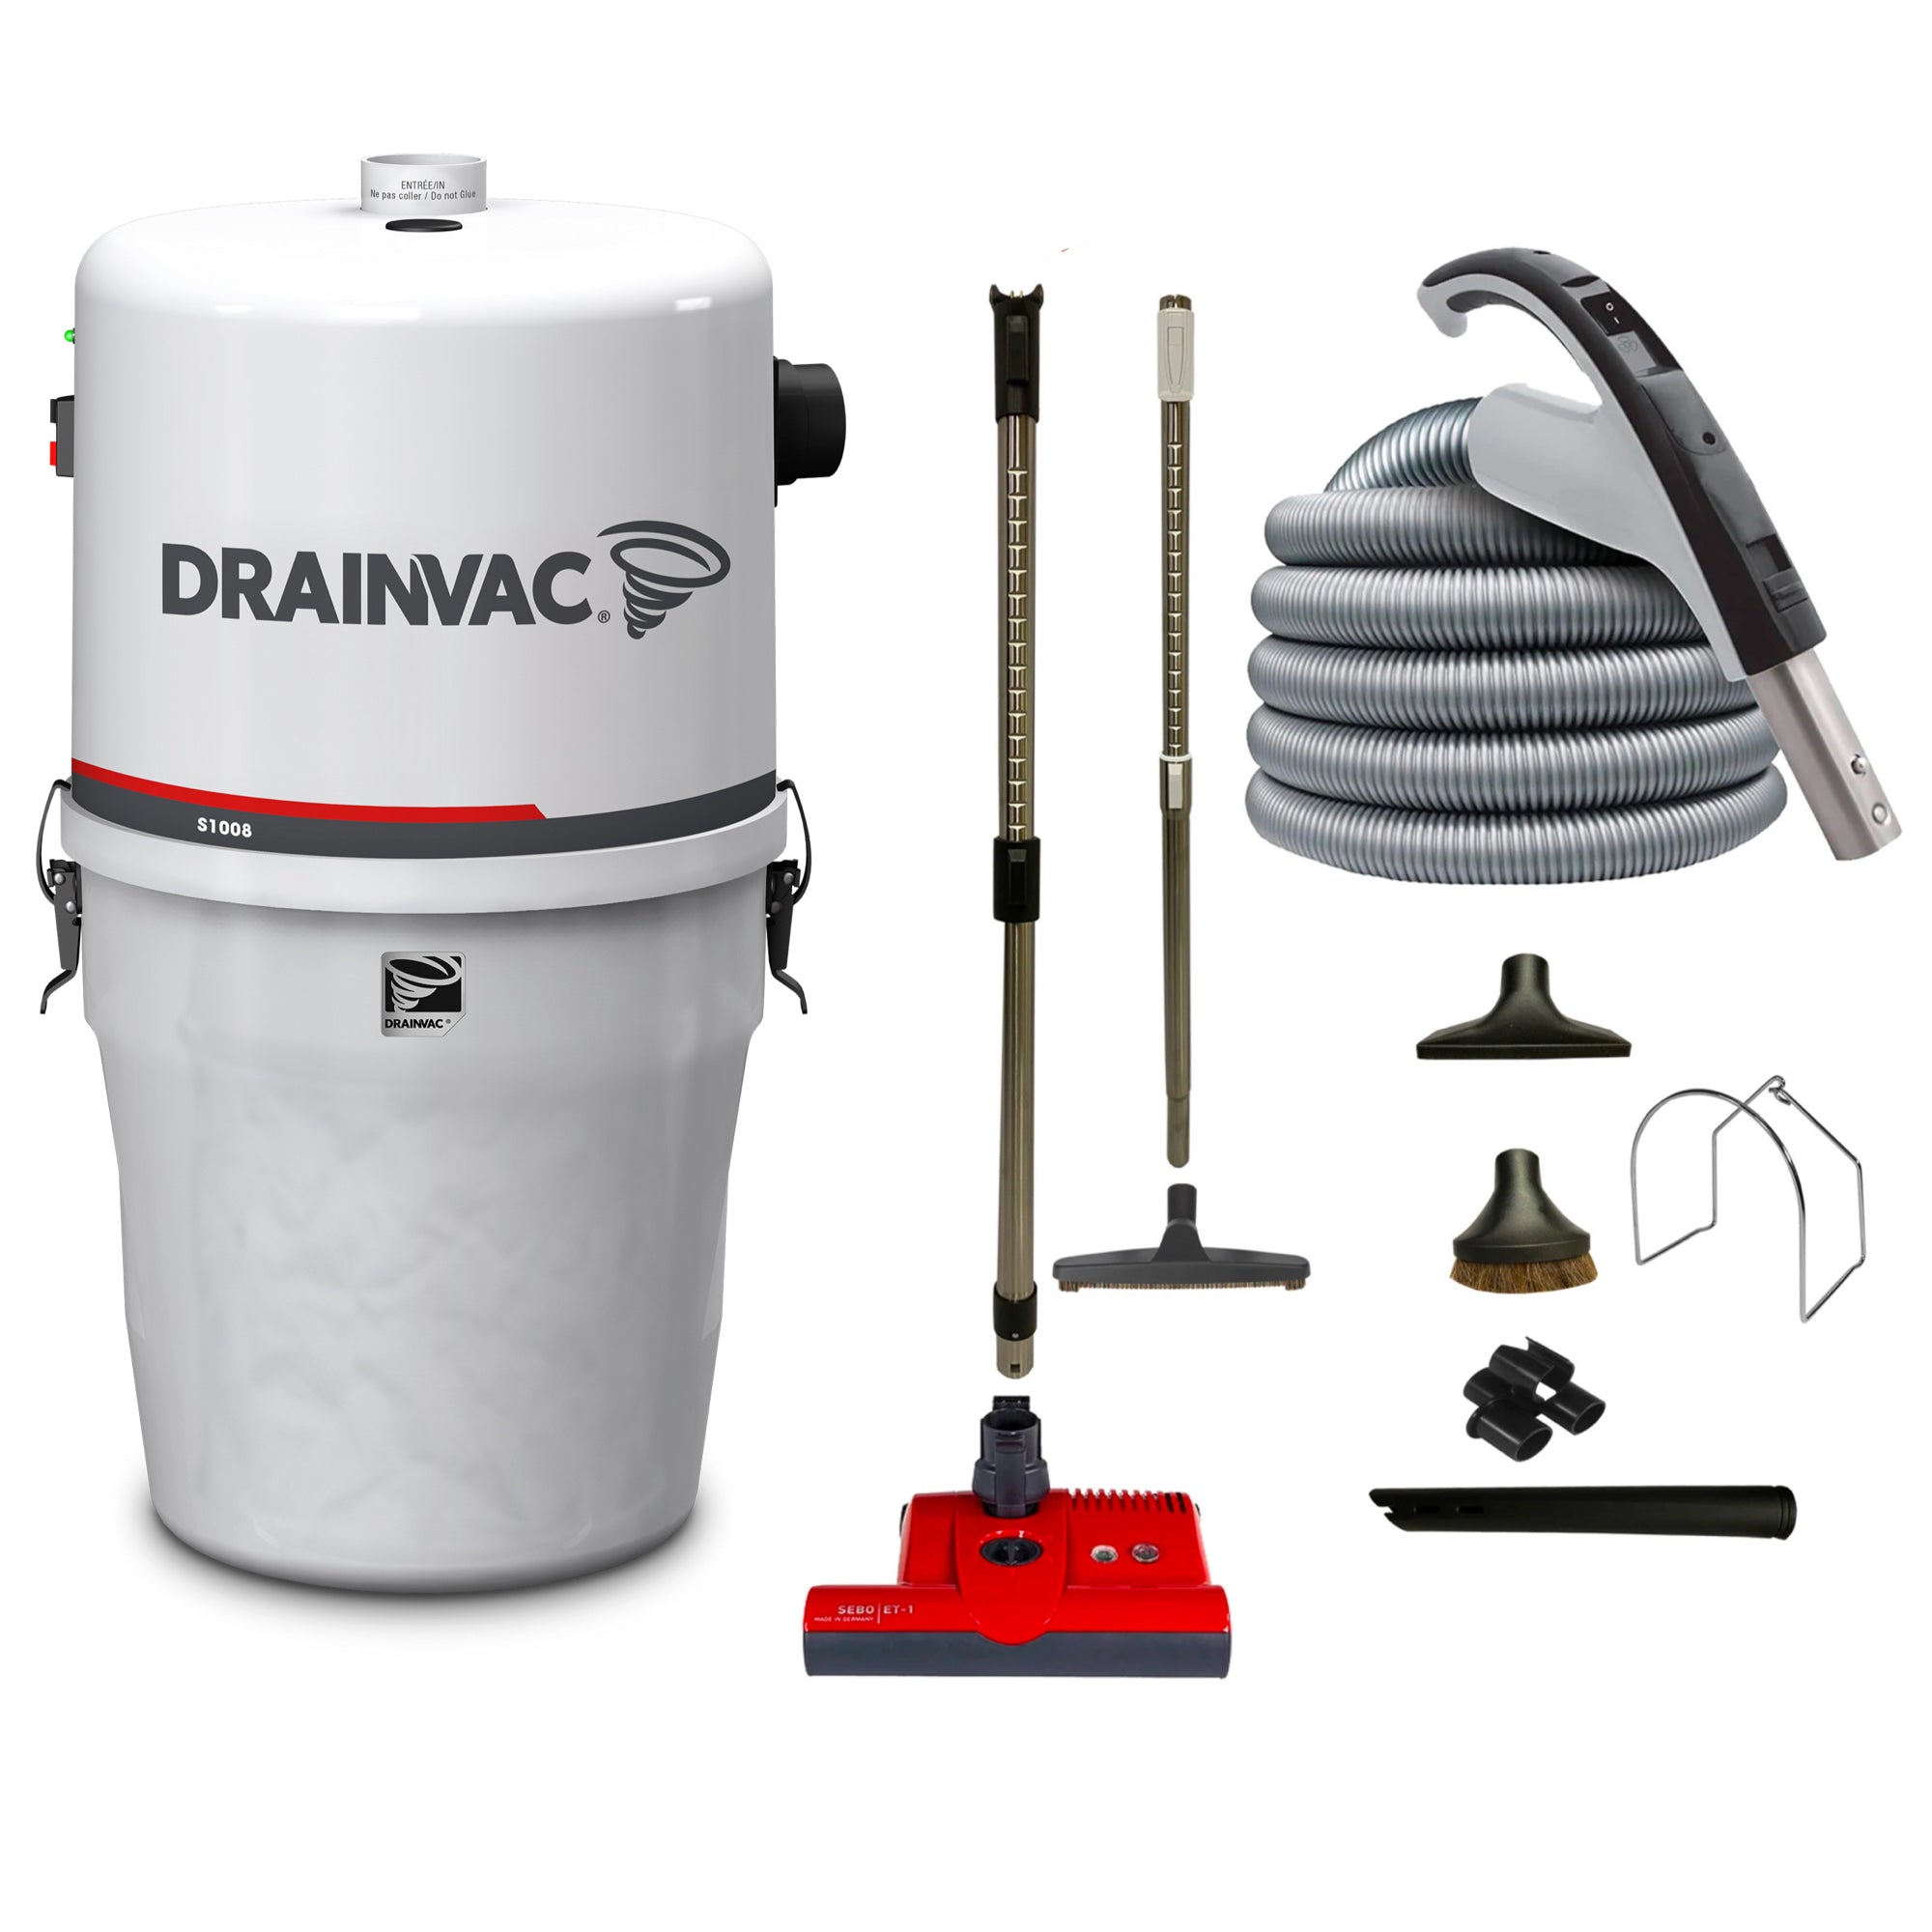 DrainVac S1008 Central Vacuum with SEBO ET-1 Electric Package